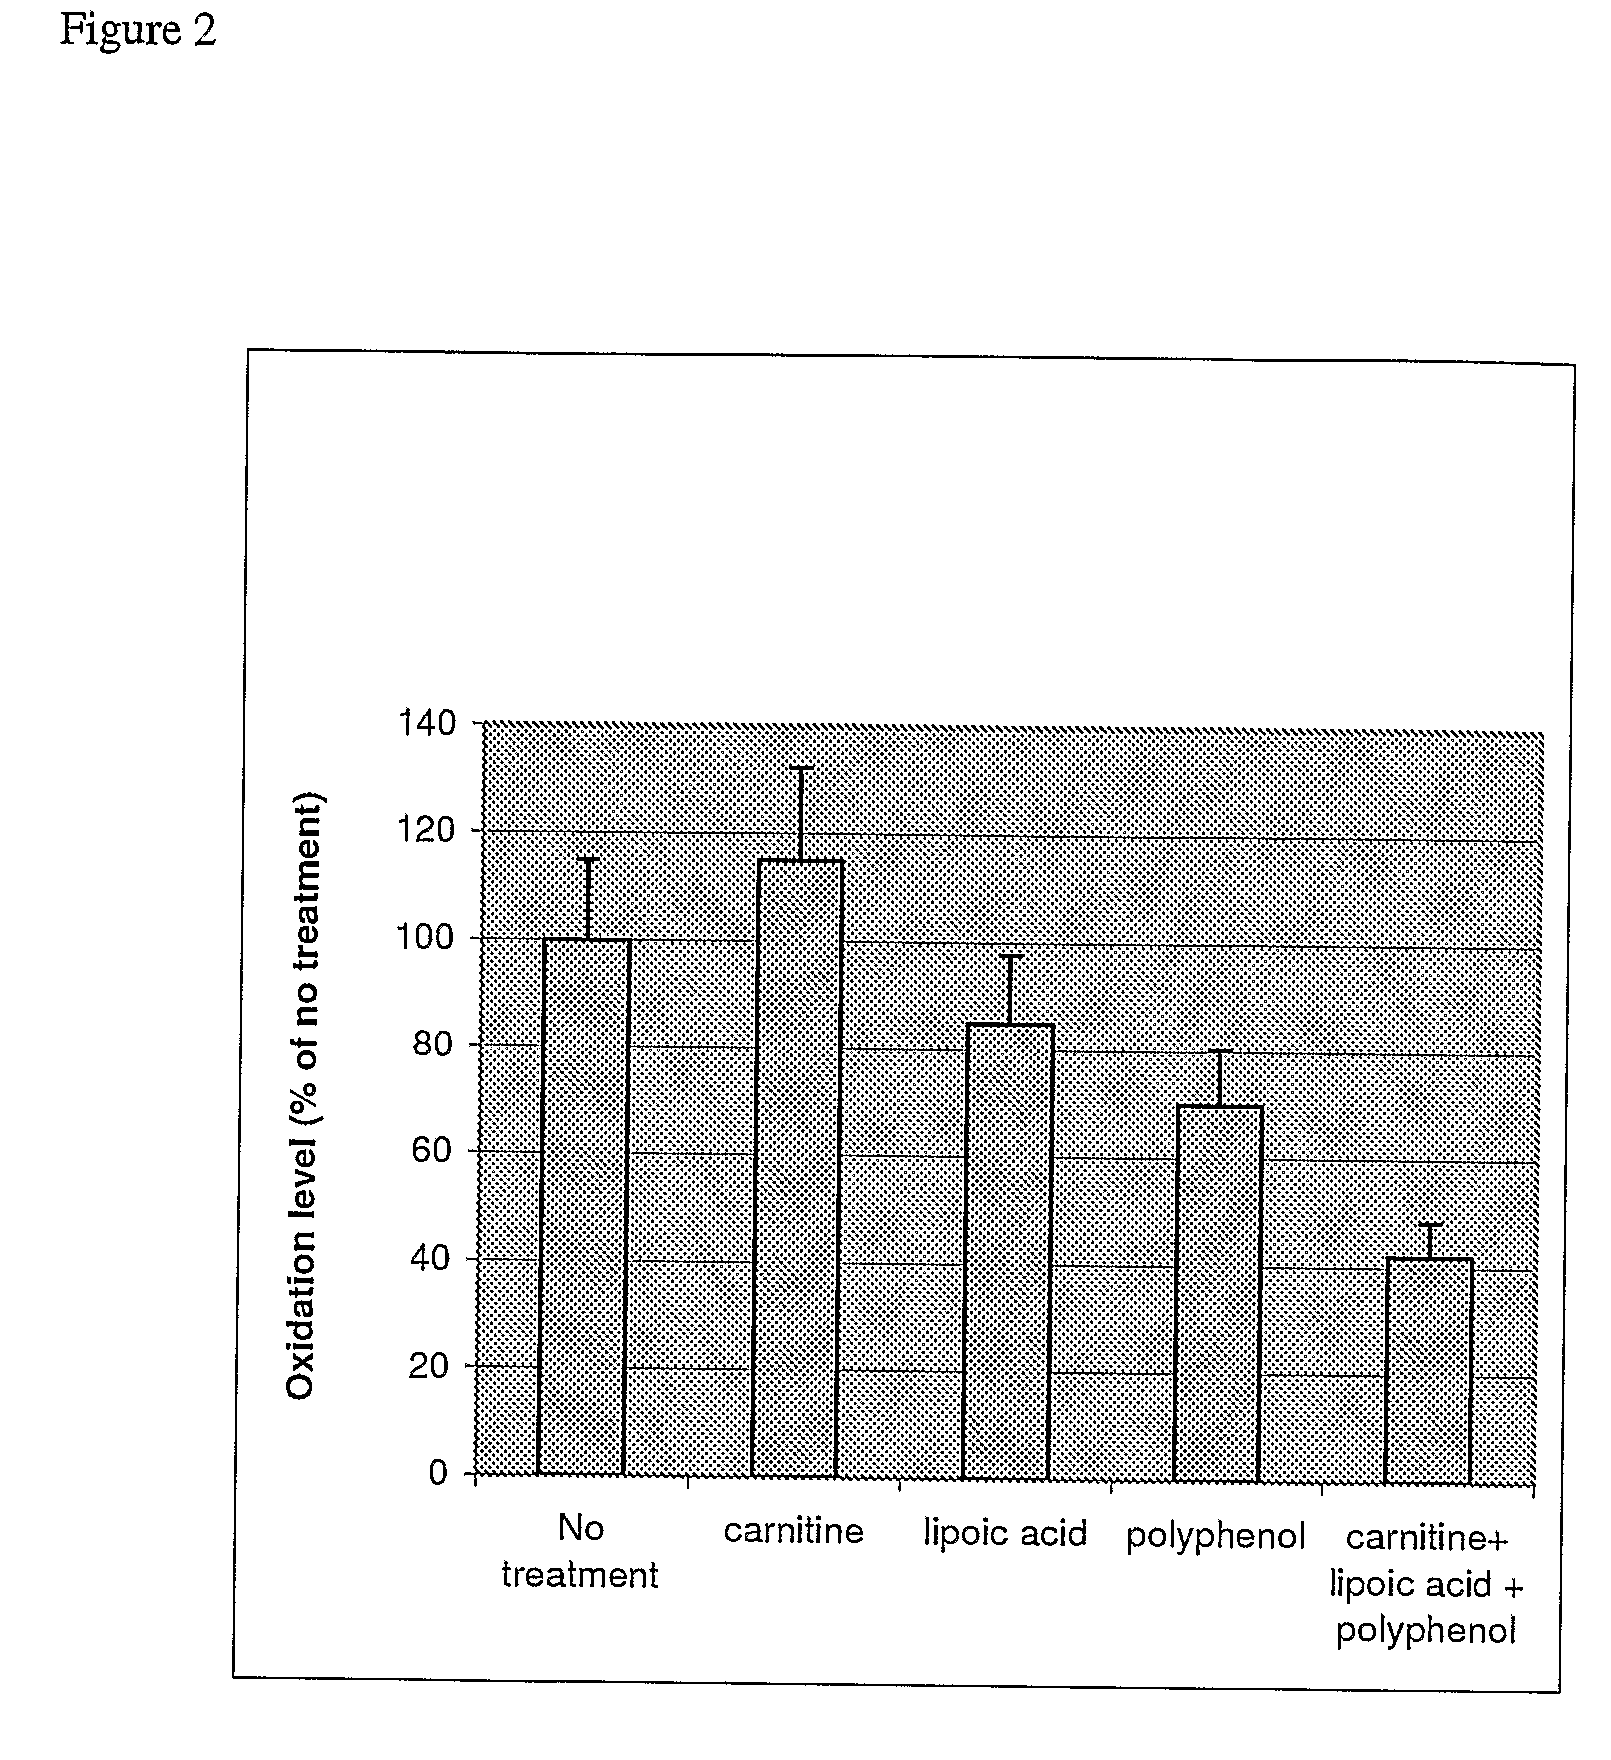 Dietary Methods and Compositions for Enhancing Metabolism and Reducing Reactive Oxygen Species